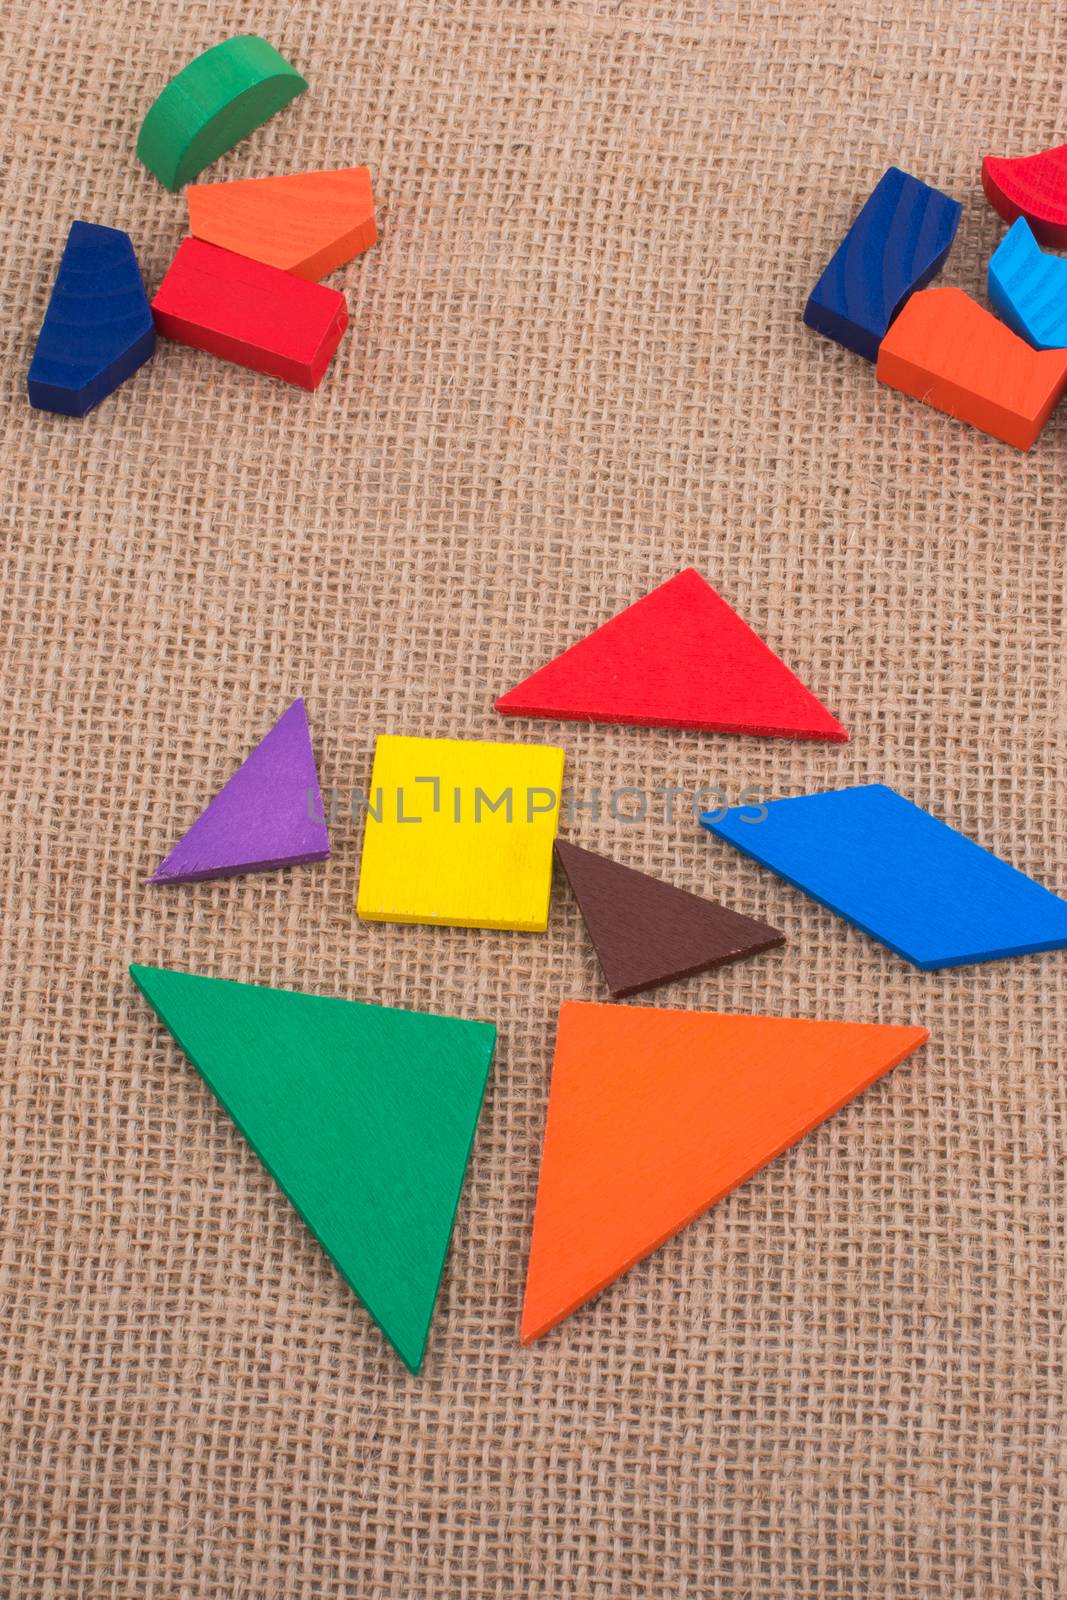 Colorful pieces of a square tangram puzzle